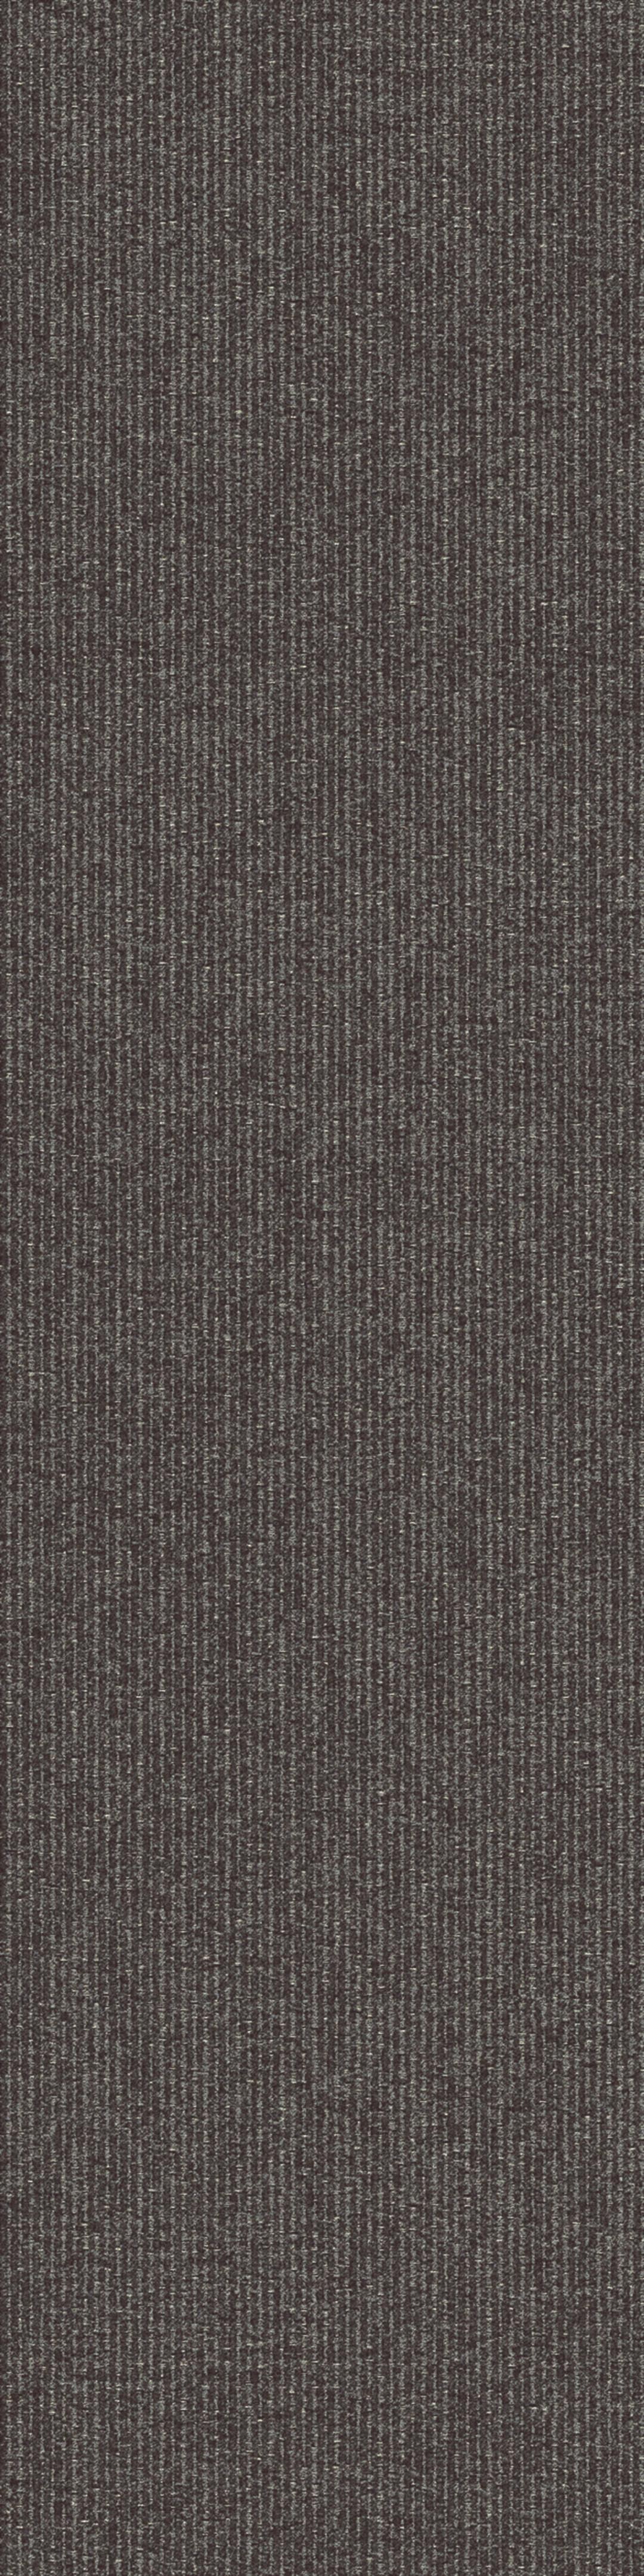 Embodied Beauty - Zen Stitch - Coal from Inzide